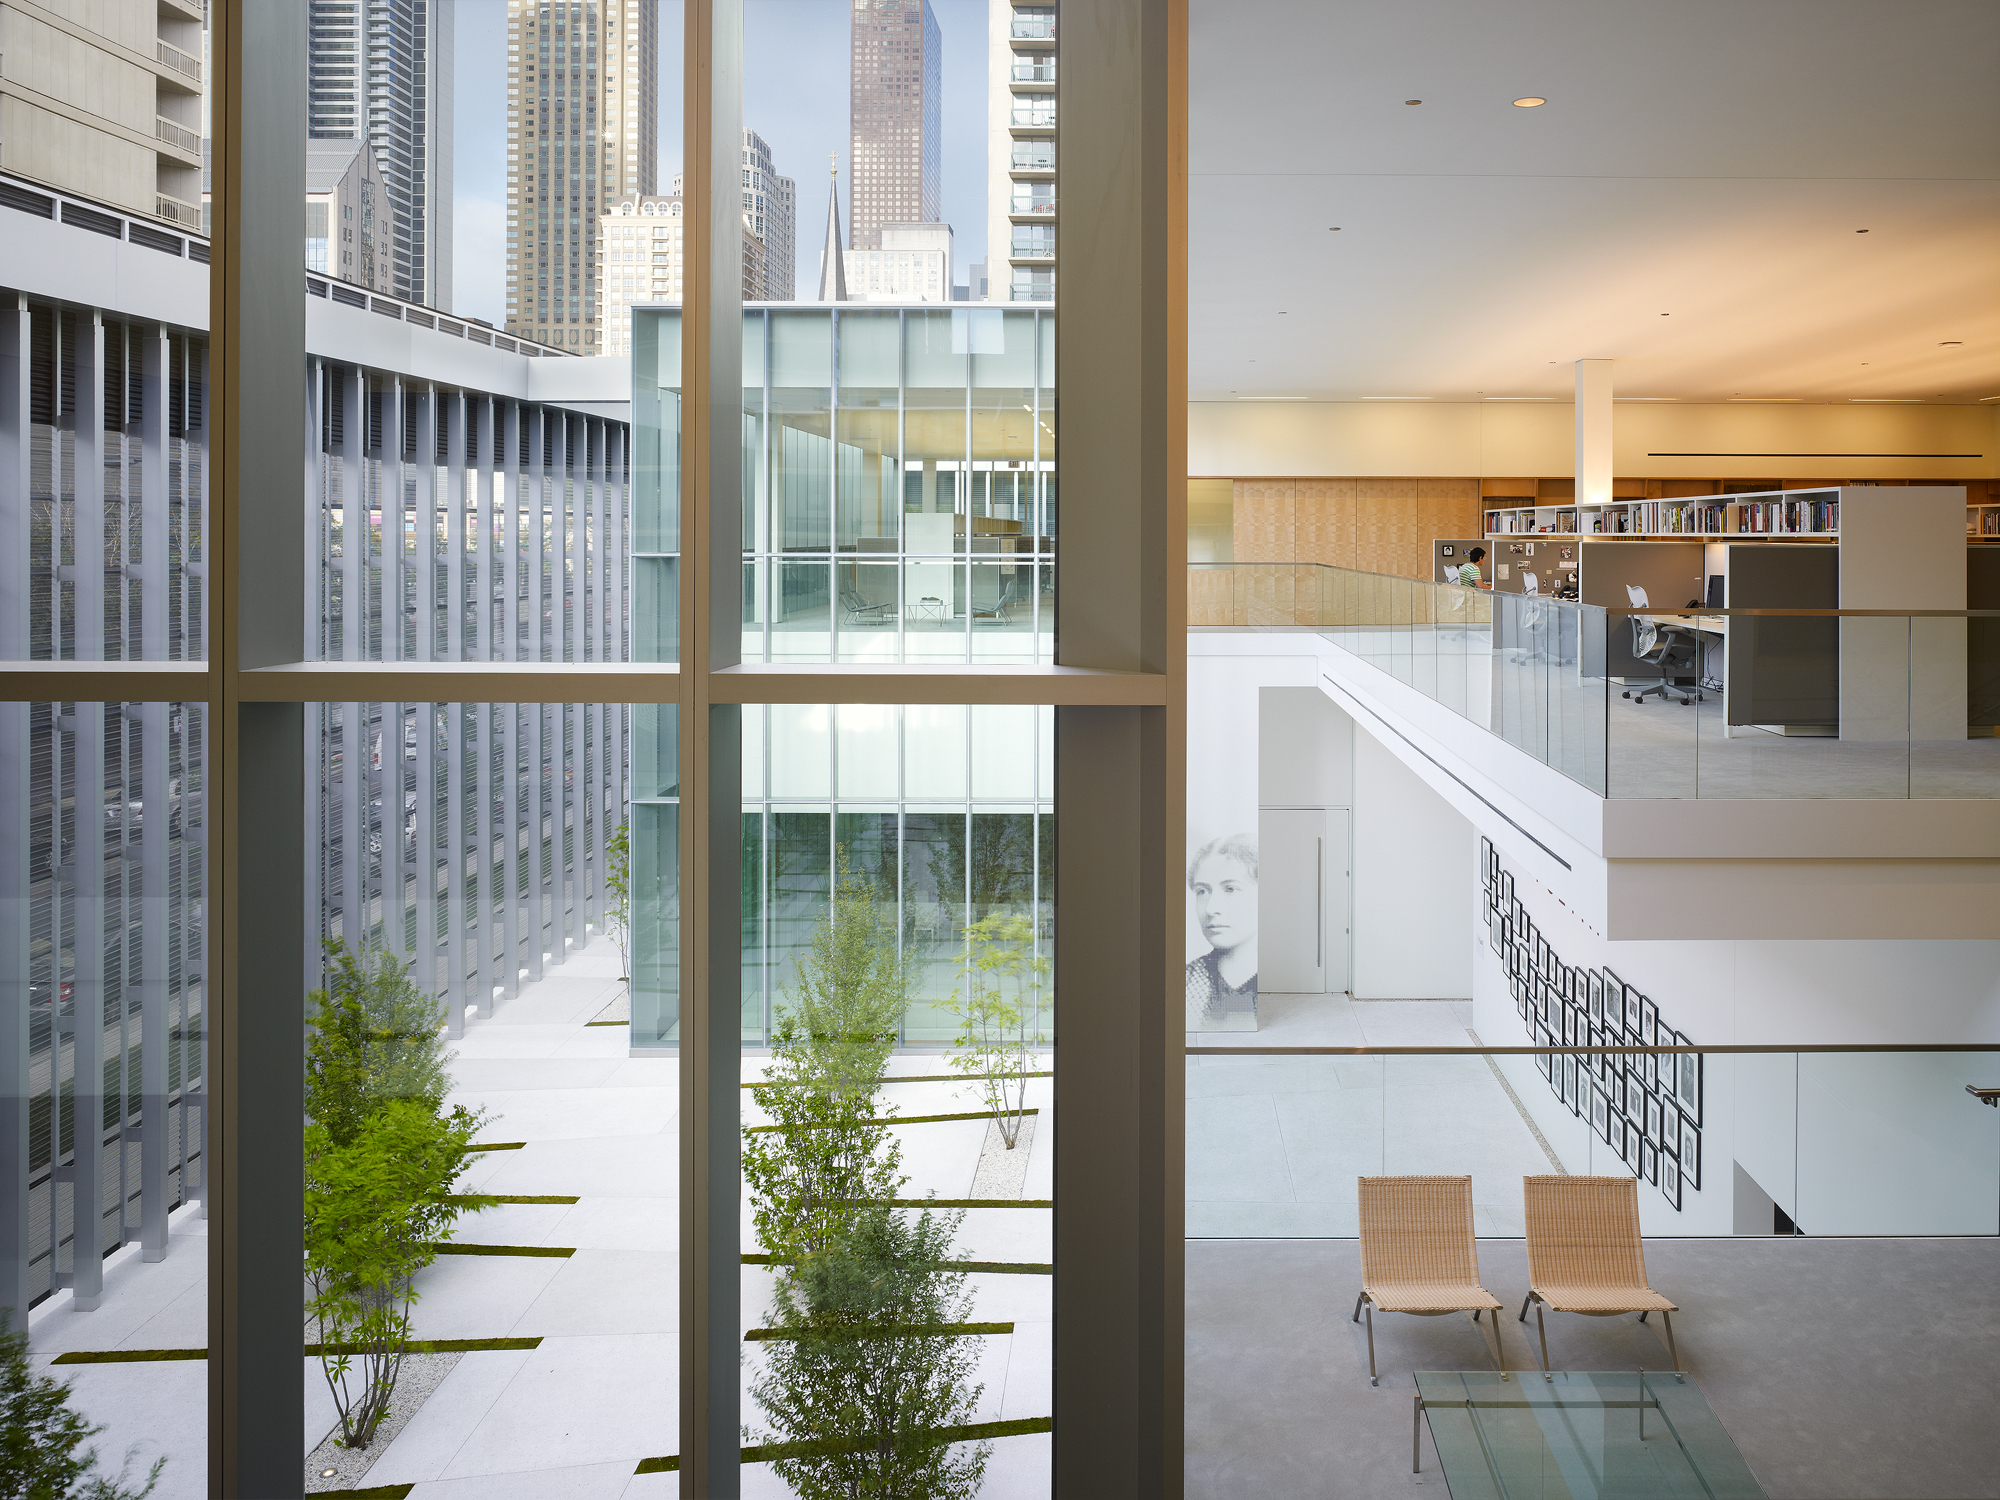  Poetry Foundation  John Ronan Architects  Chicago, IL      Return to Projects  